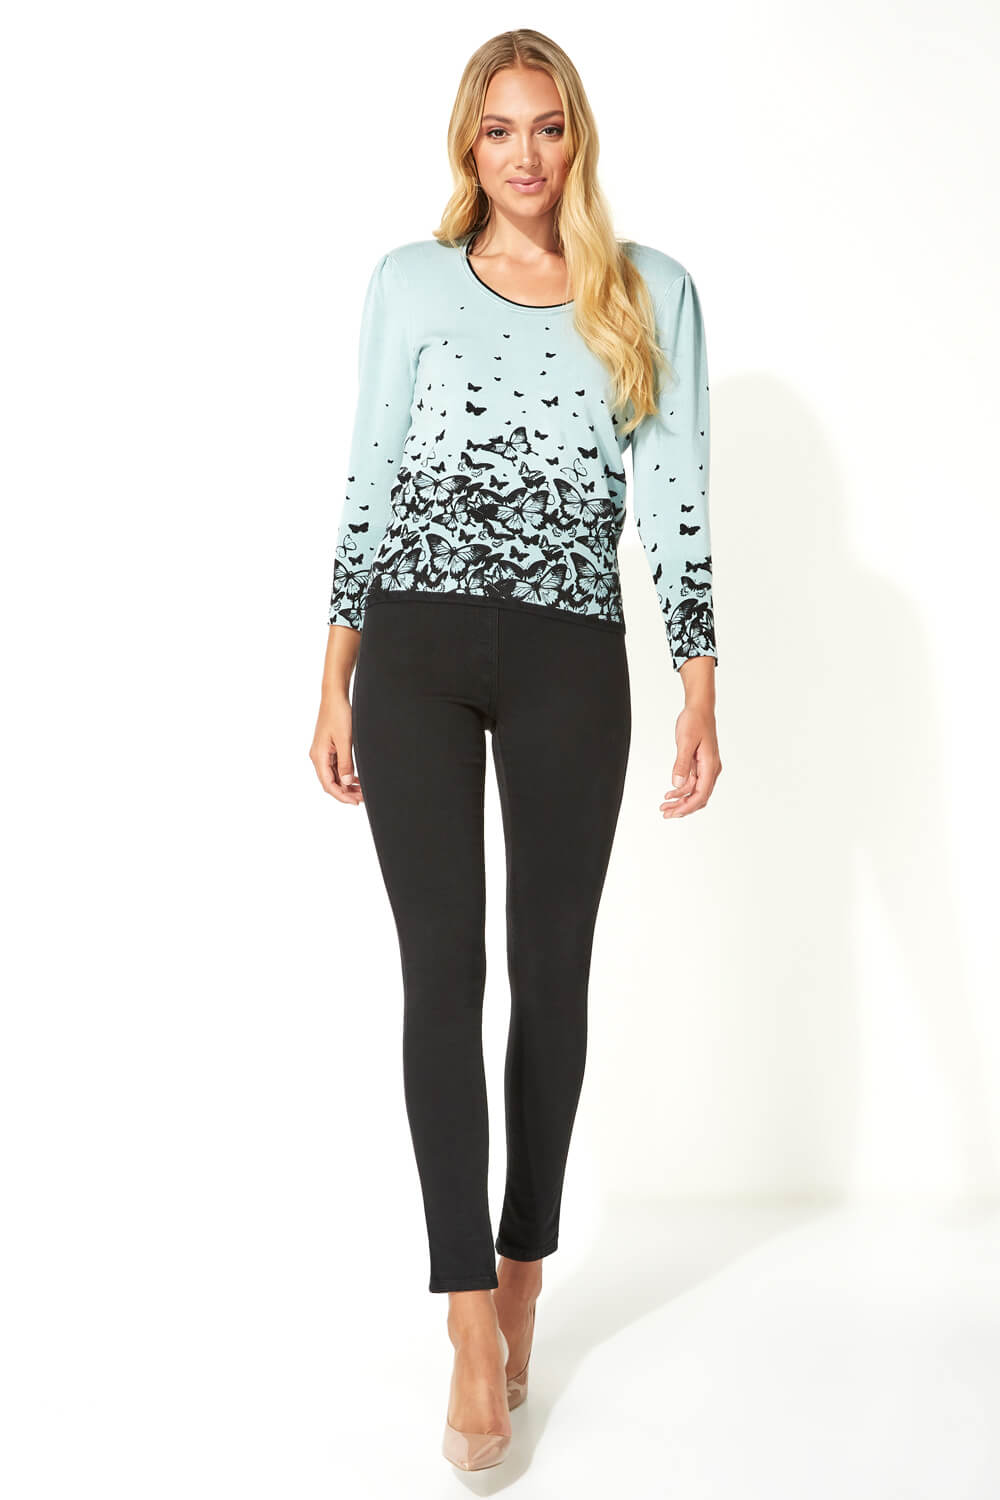 Mint Butterfly Print Jumper, Image 2 of 5